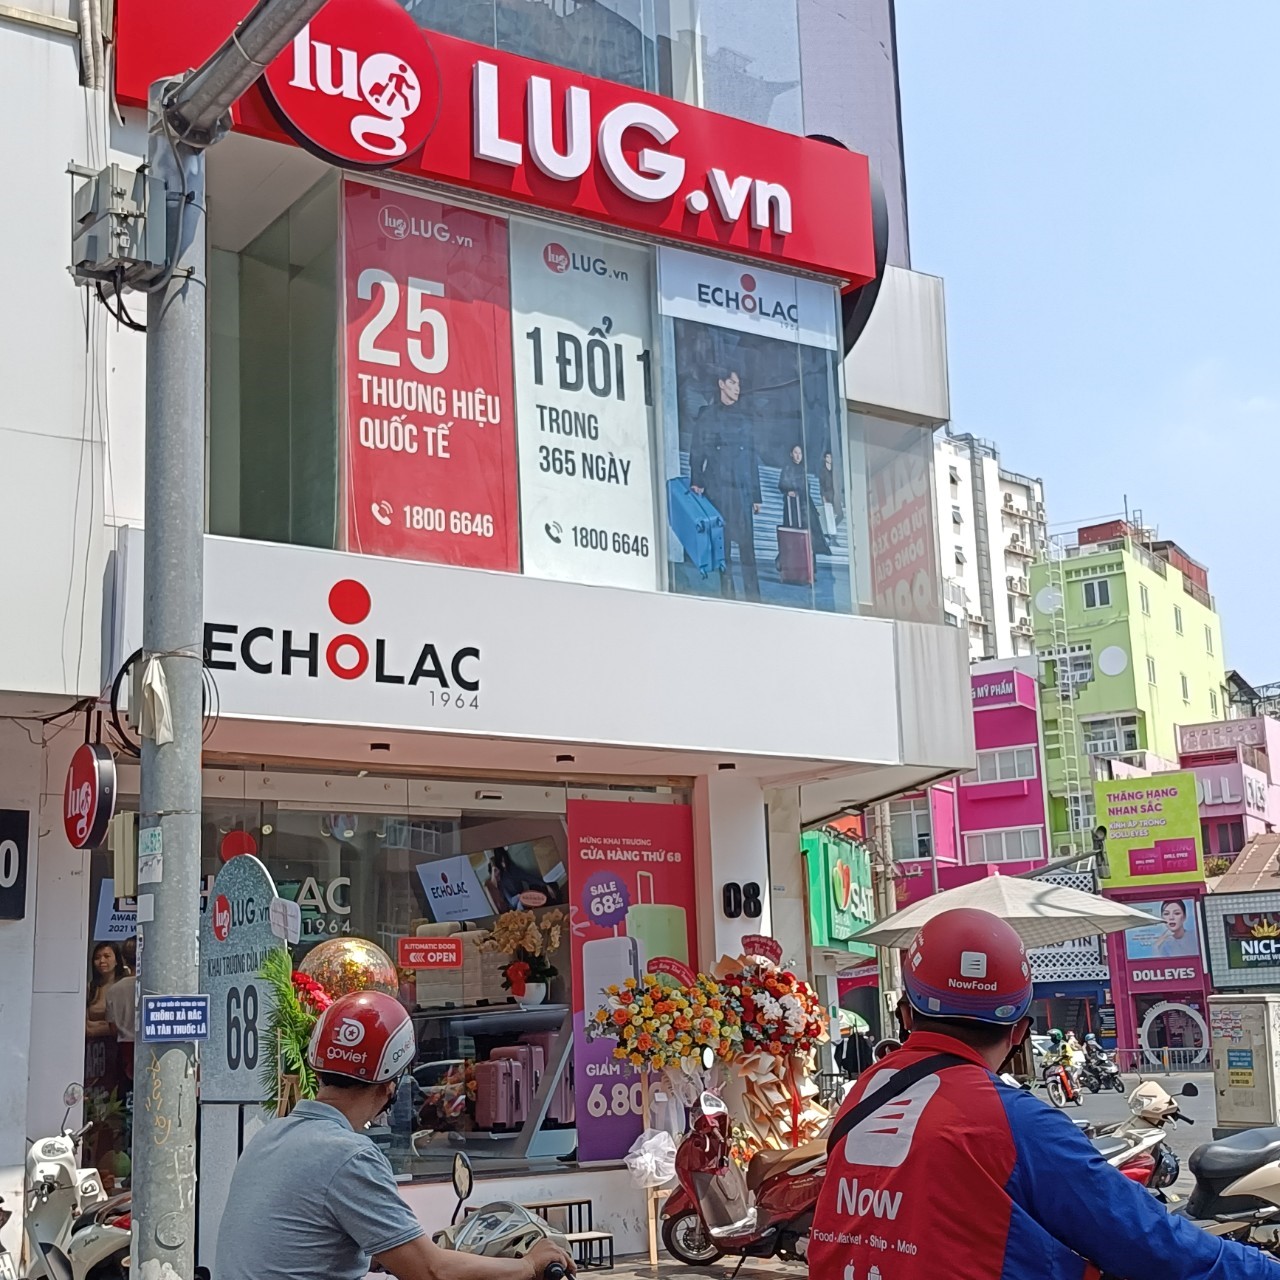 This store is a partnership between LUG.vn and Echolac - the leading luggage brand in Asia.